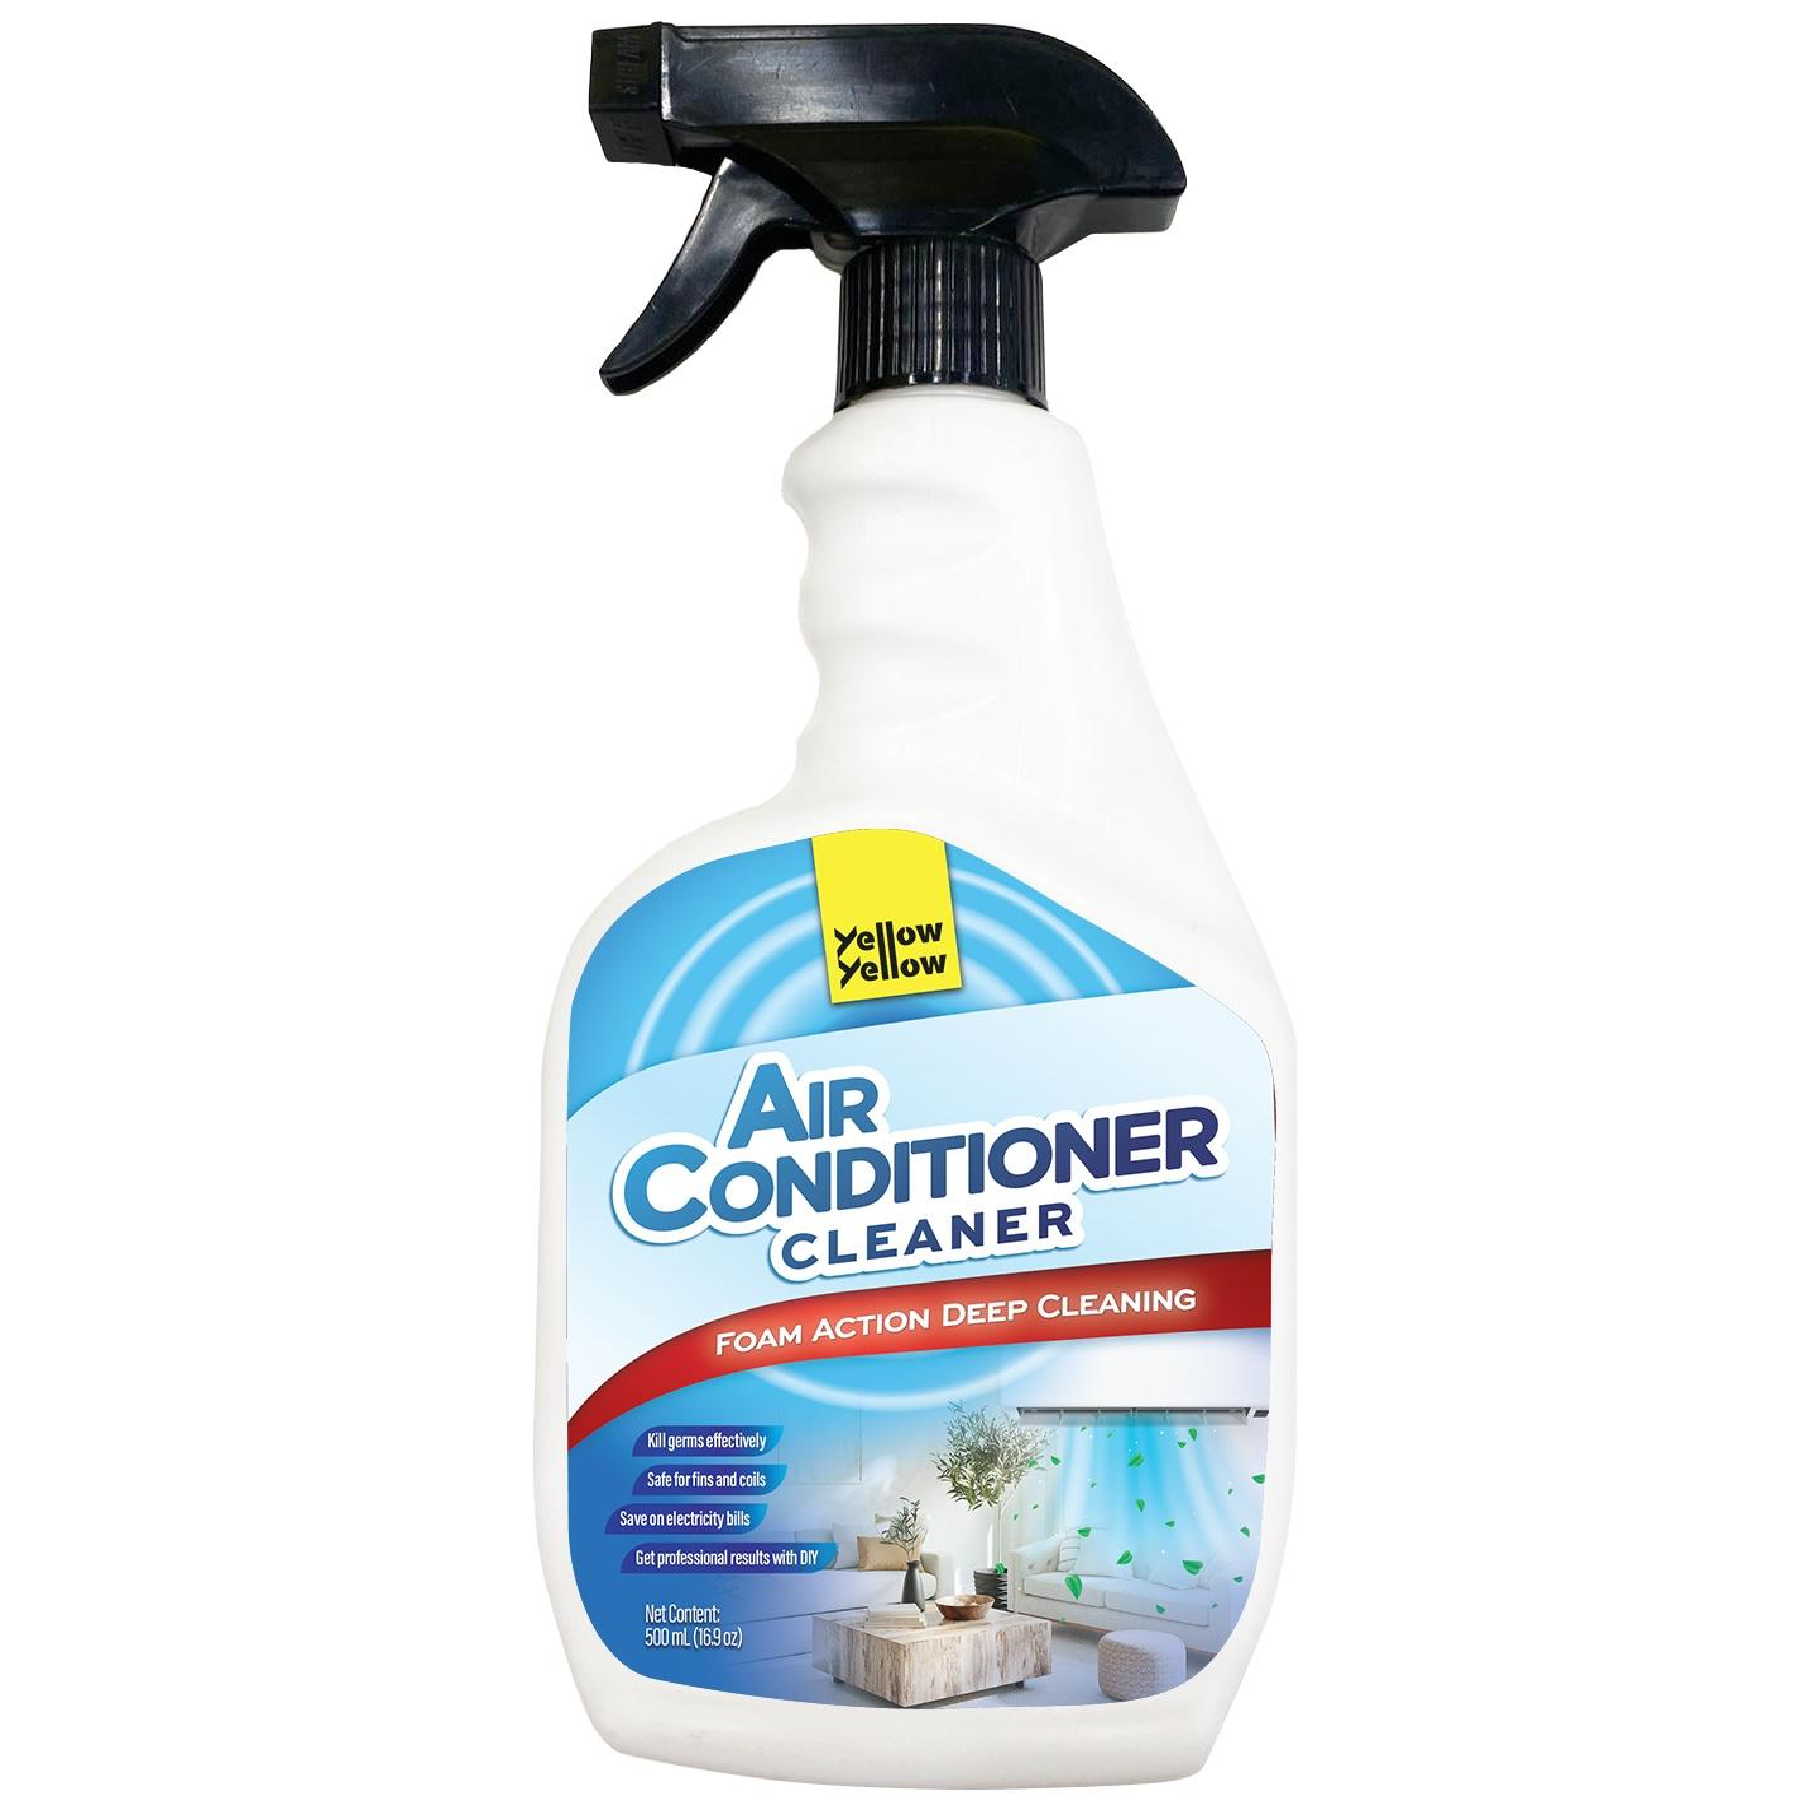 Yellowyellow AIR CONDITIONER Cleaner With DEEP FOAMING Action 500ML